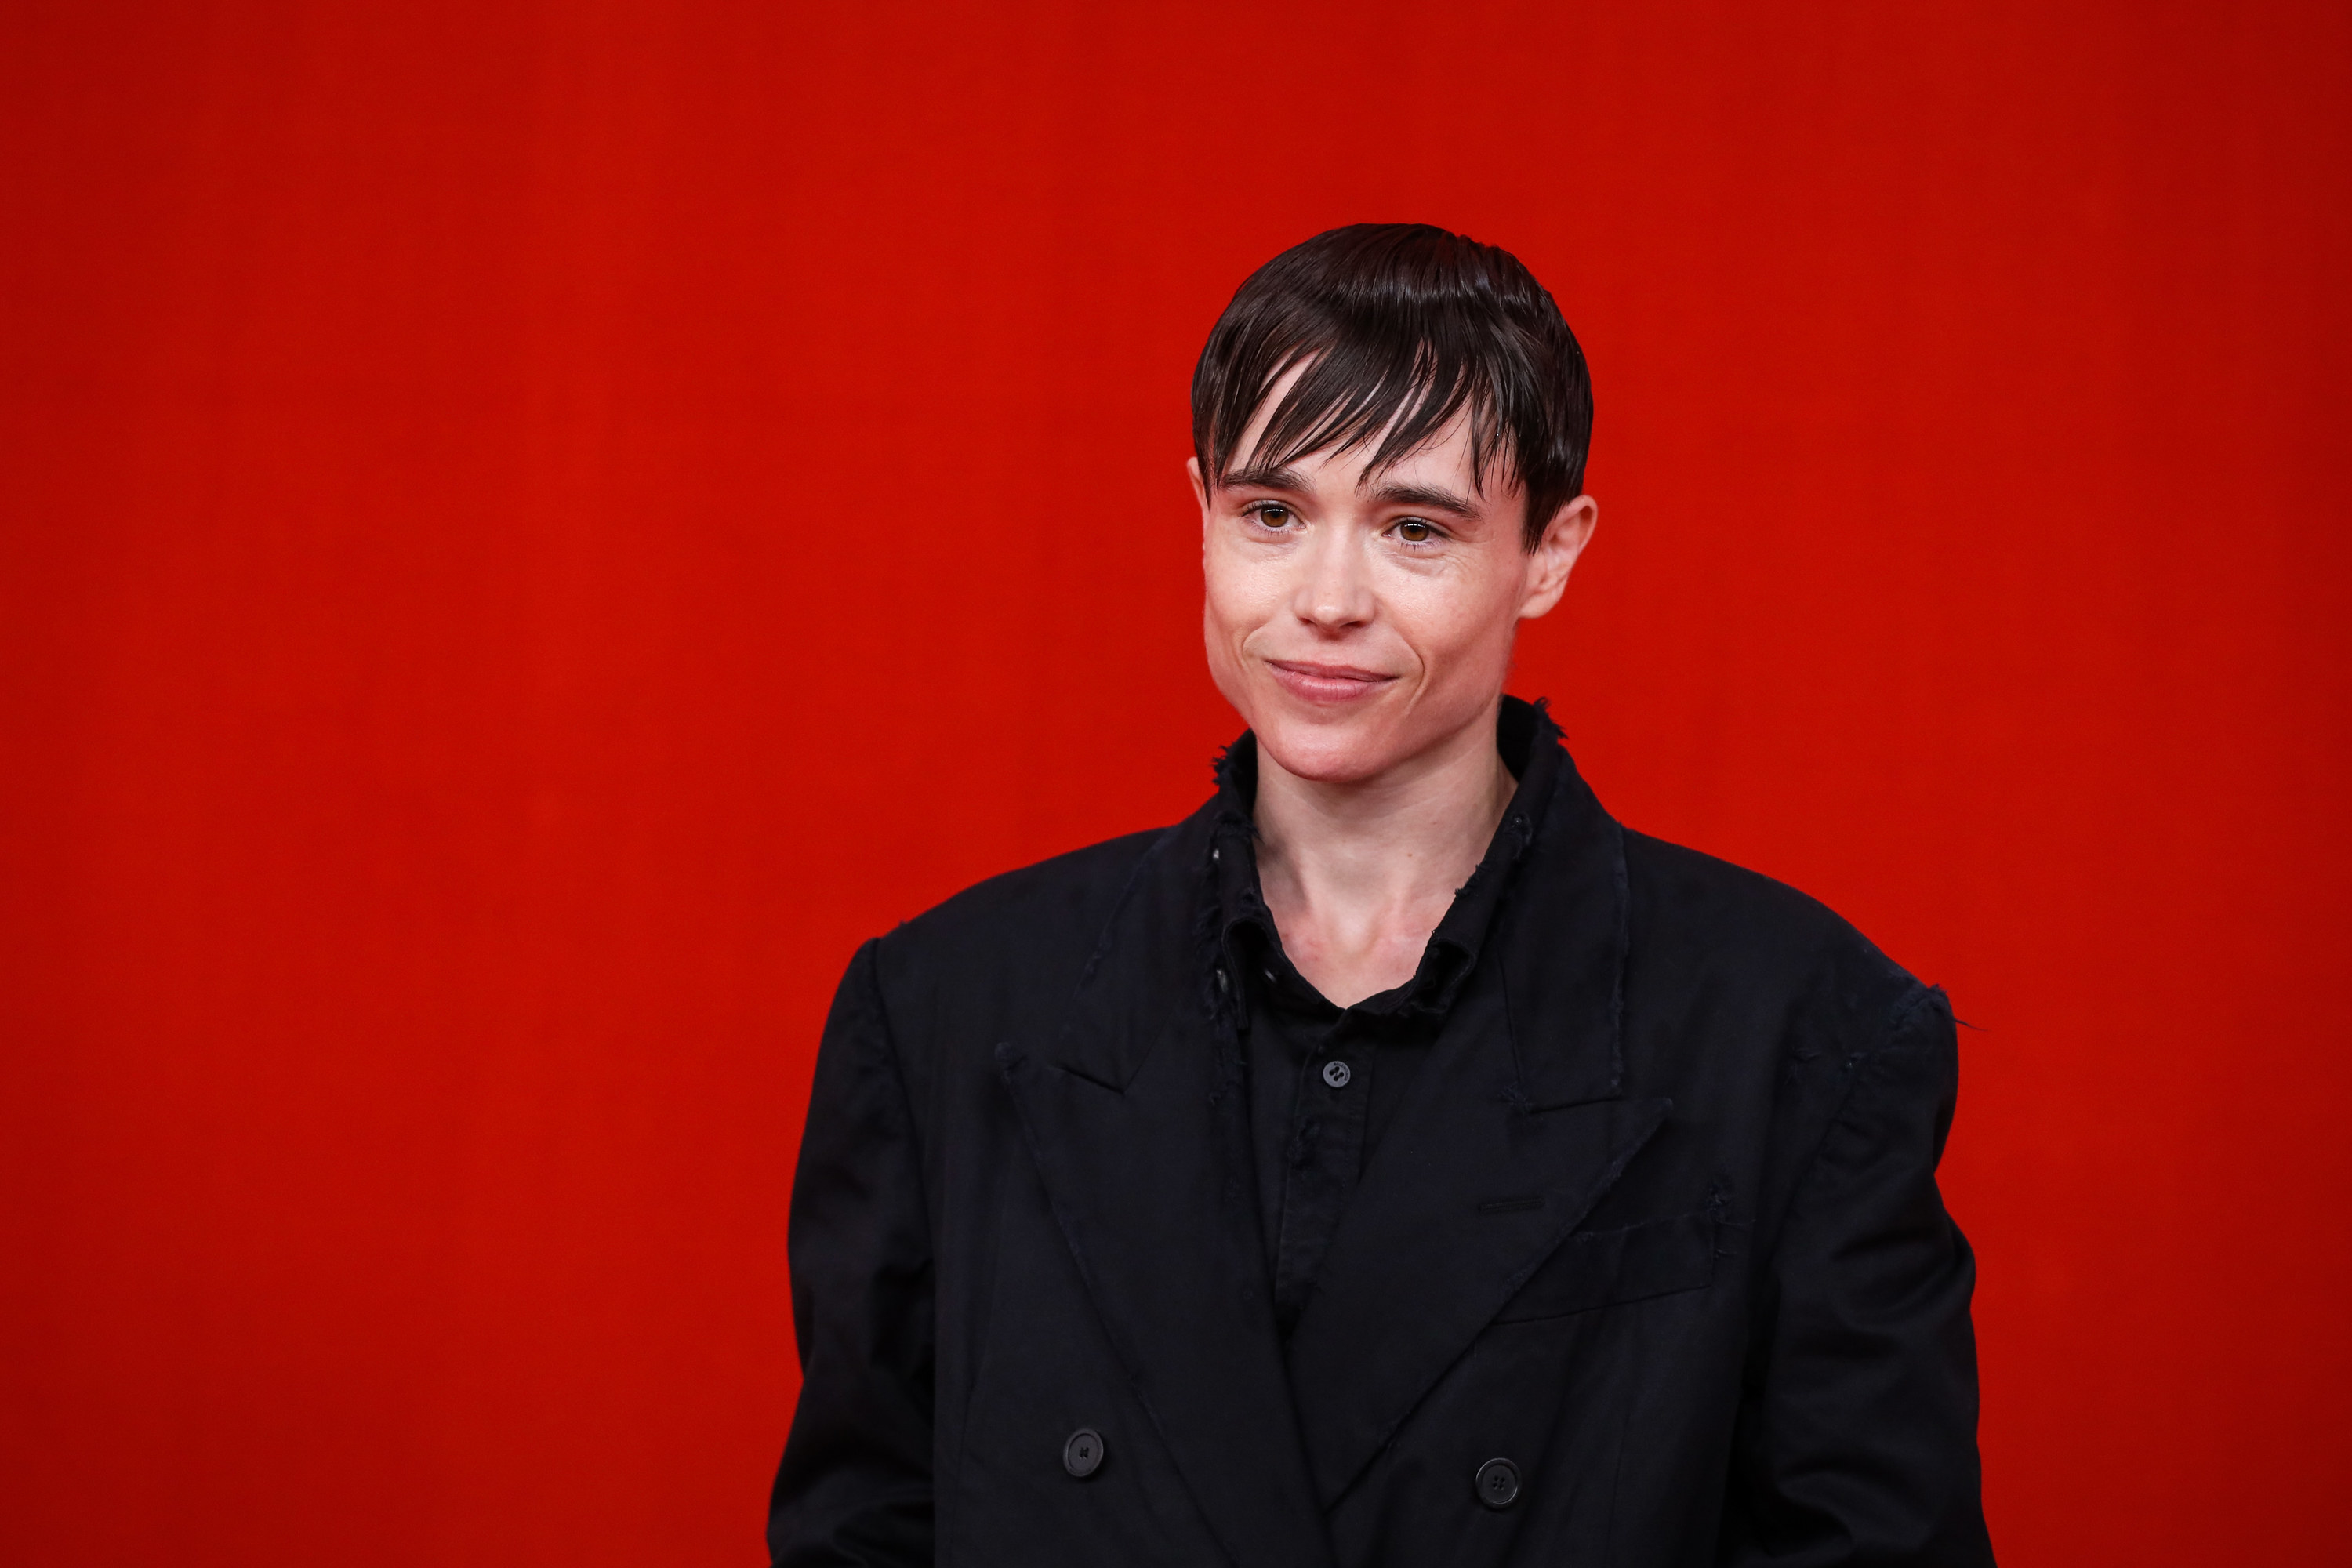 Close-up of Elliot in a suit jacket and shirt against a plain red background